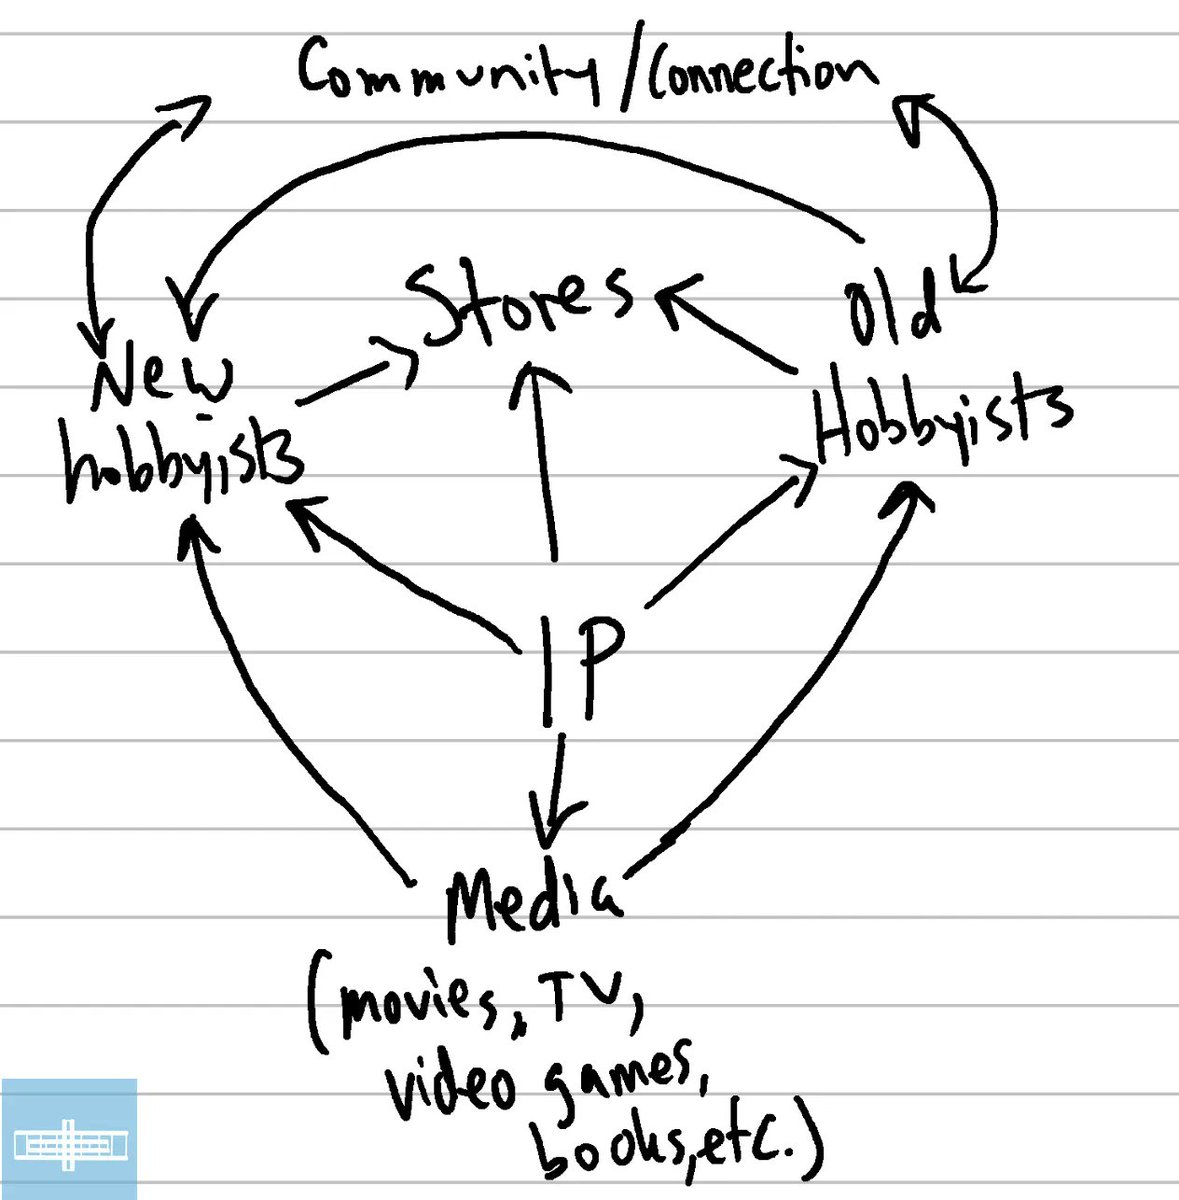 My rough sketch of how #GAW's IP relevance fuels the business